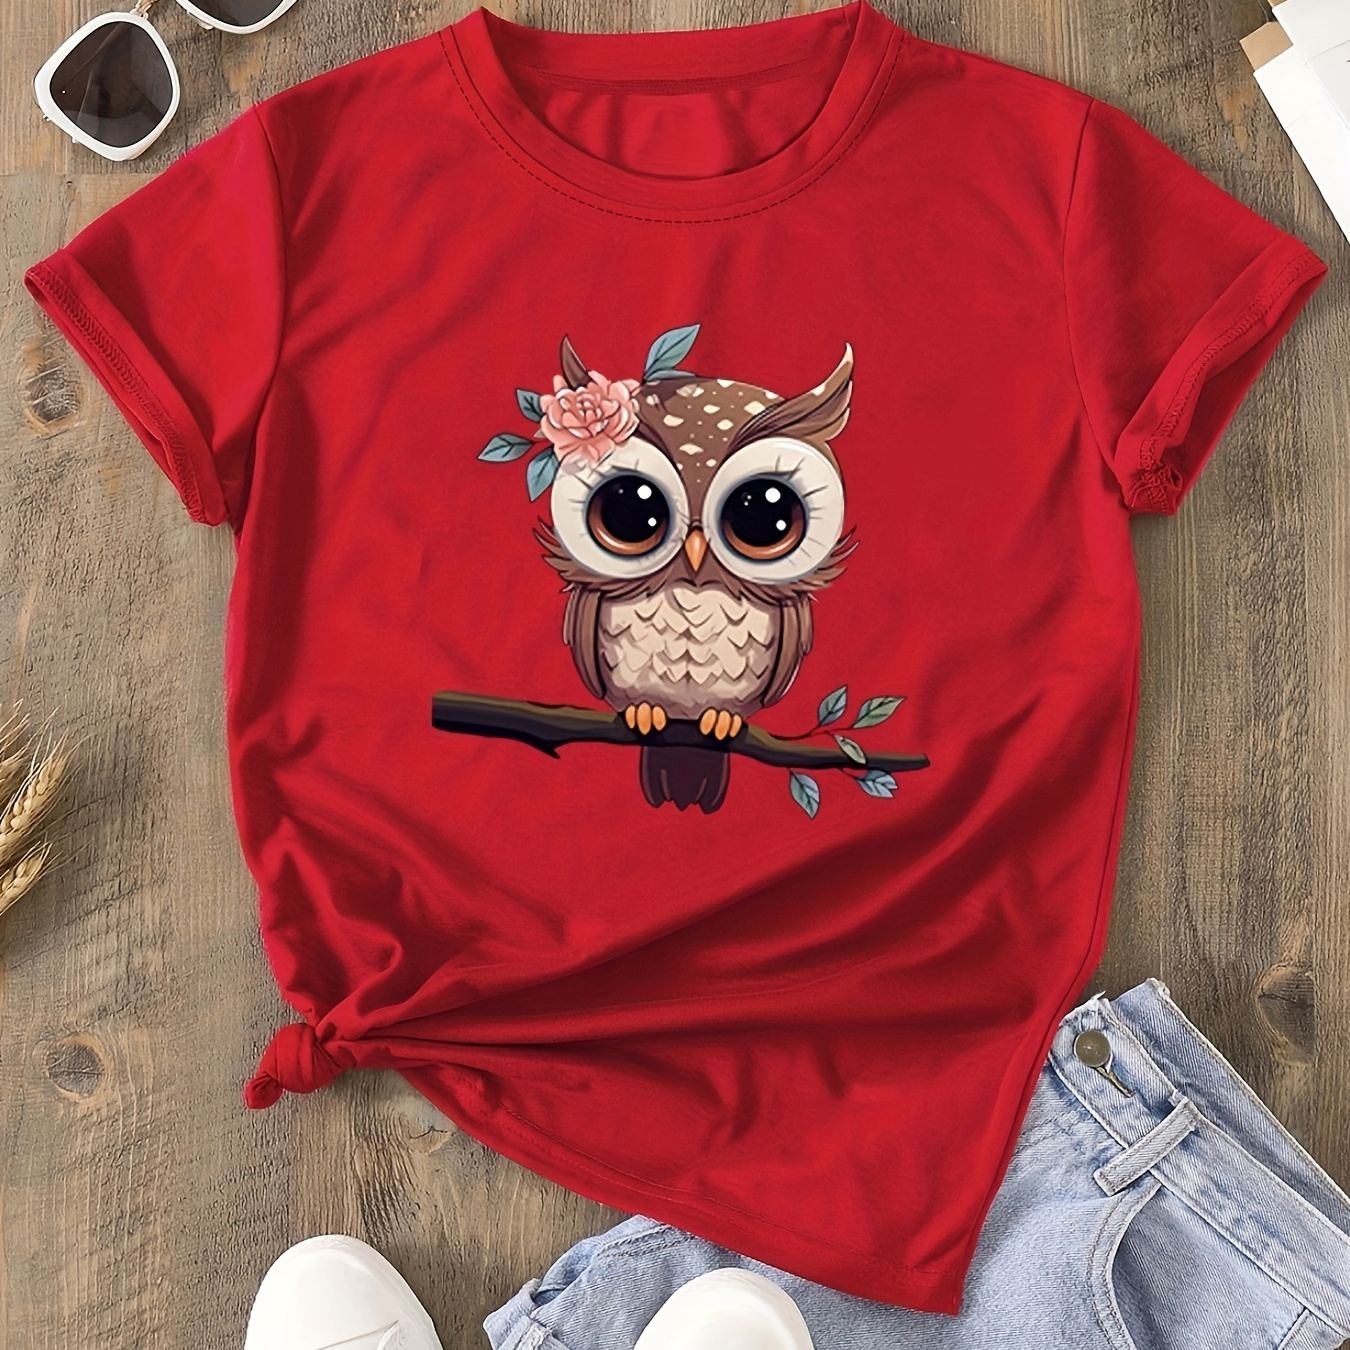 

Cartoon Owl Print T-shirt, Short Sleeve Crew Neck Casual Top For Summer & Sprng, Women's Clothing